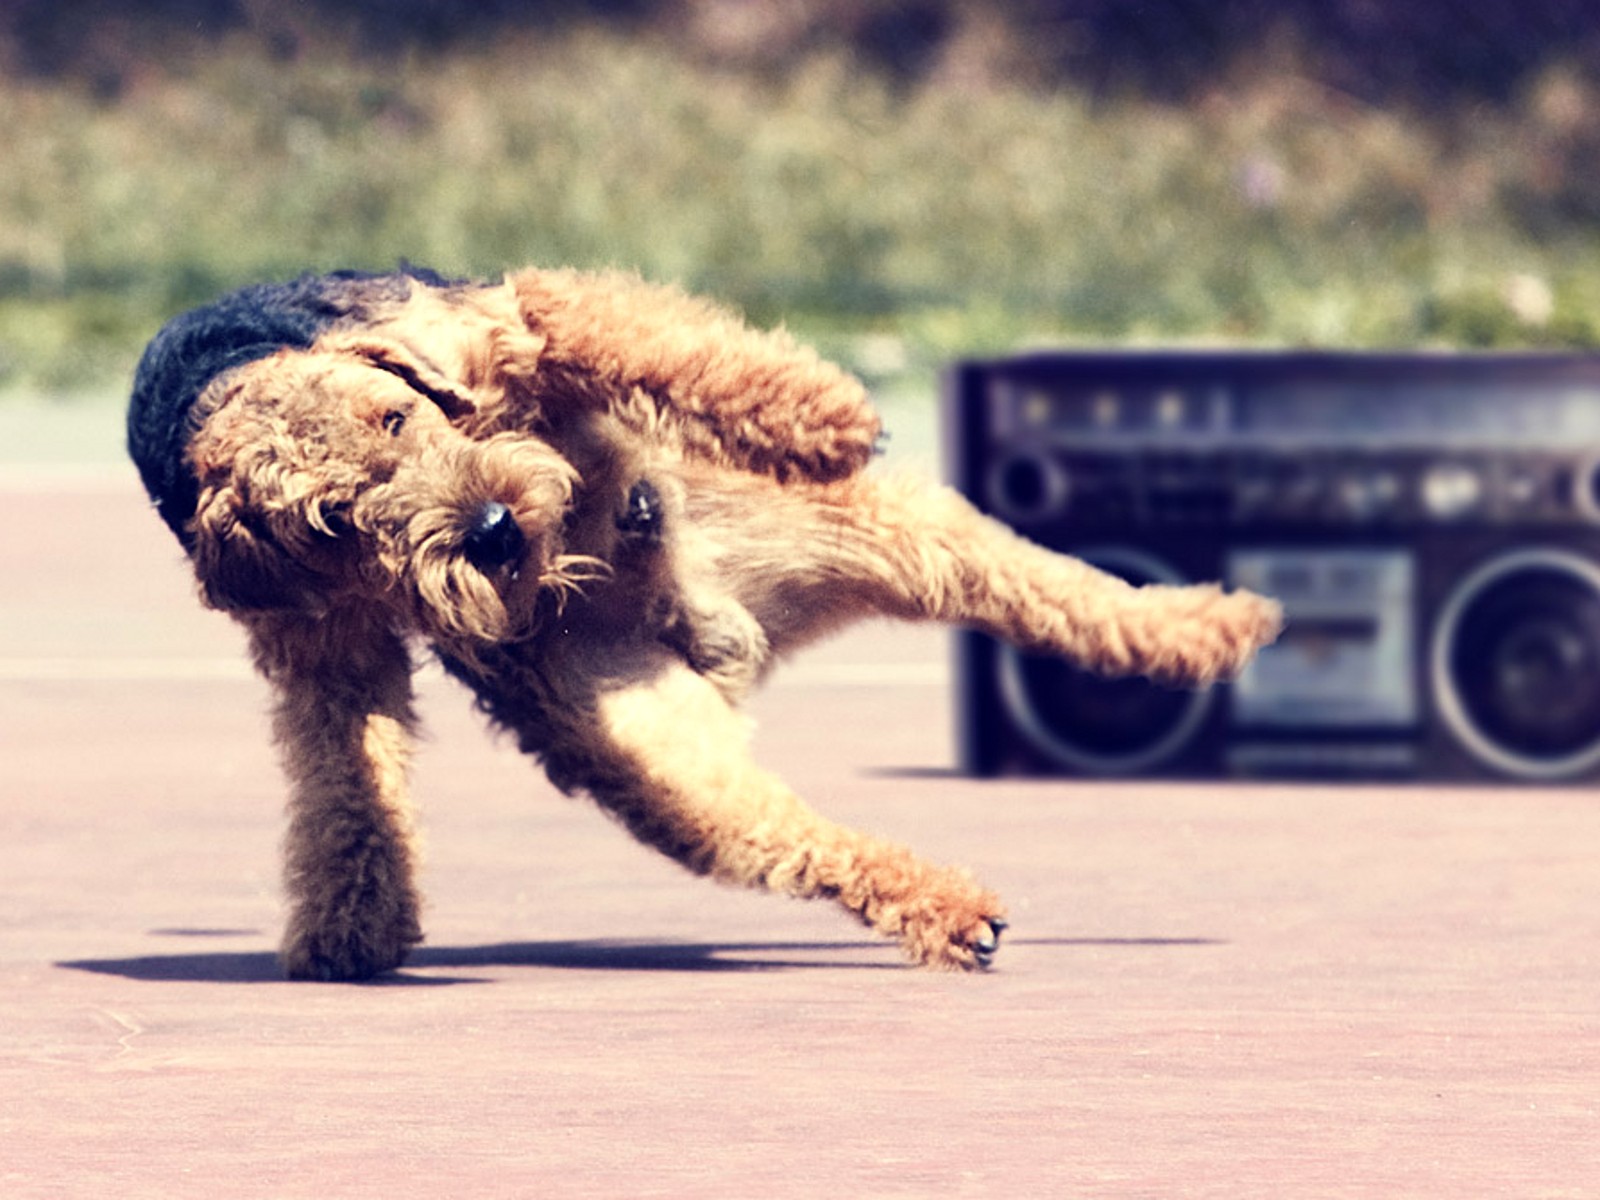 General 1600x1200 music stereos animals mammals dog outdoors humor breakdance